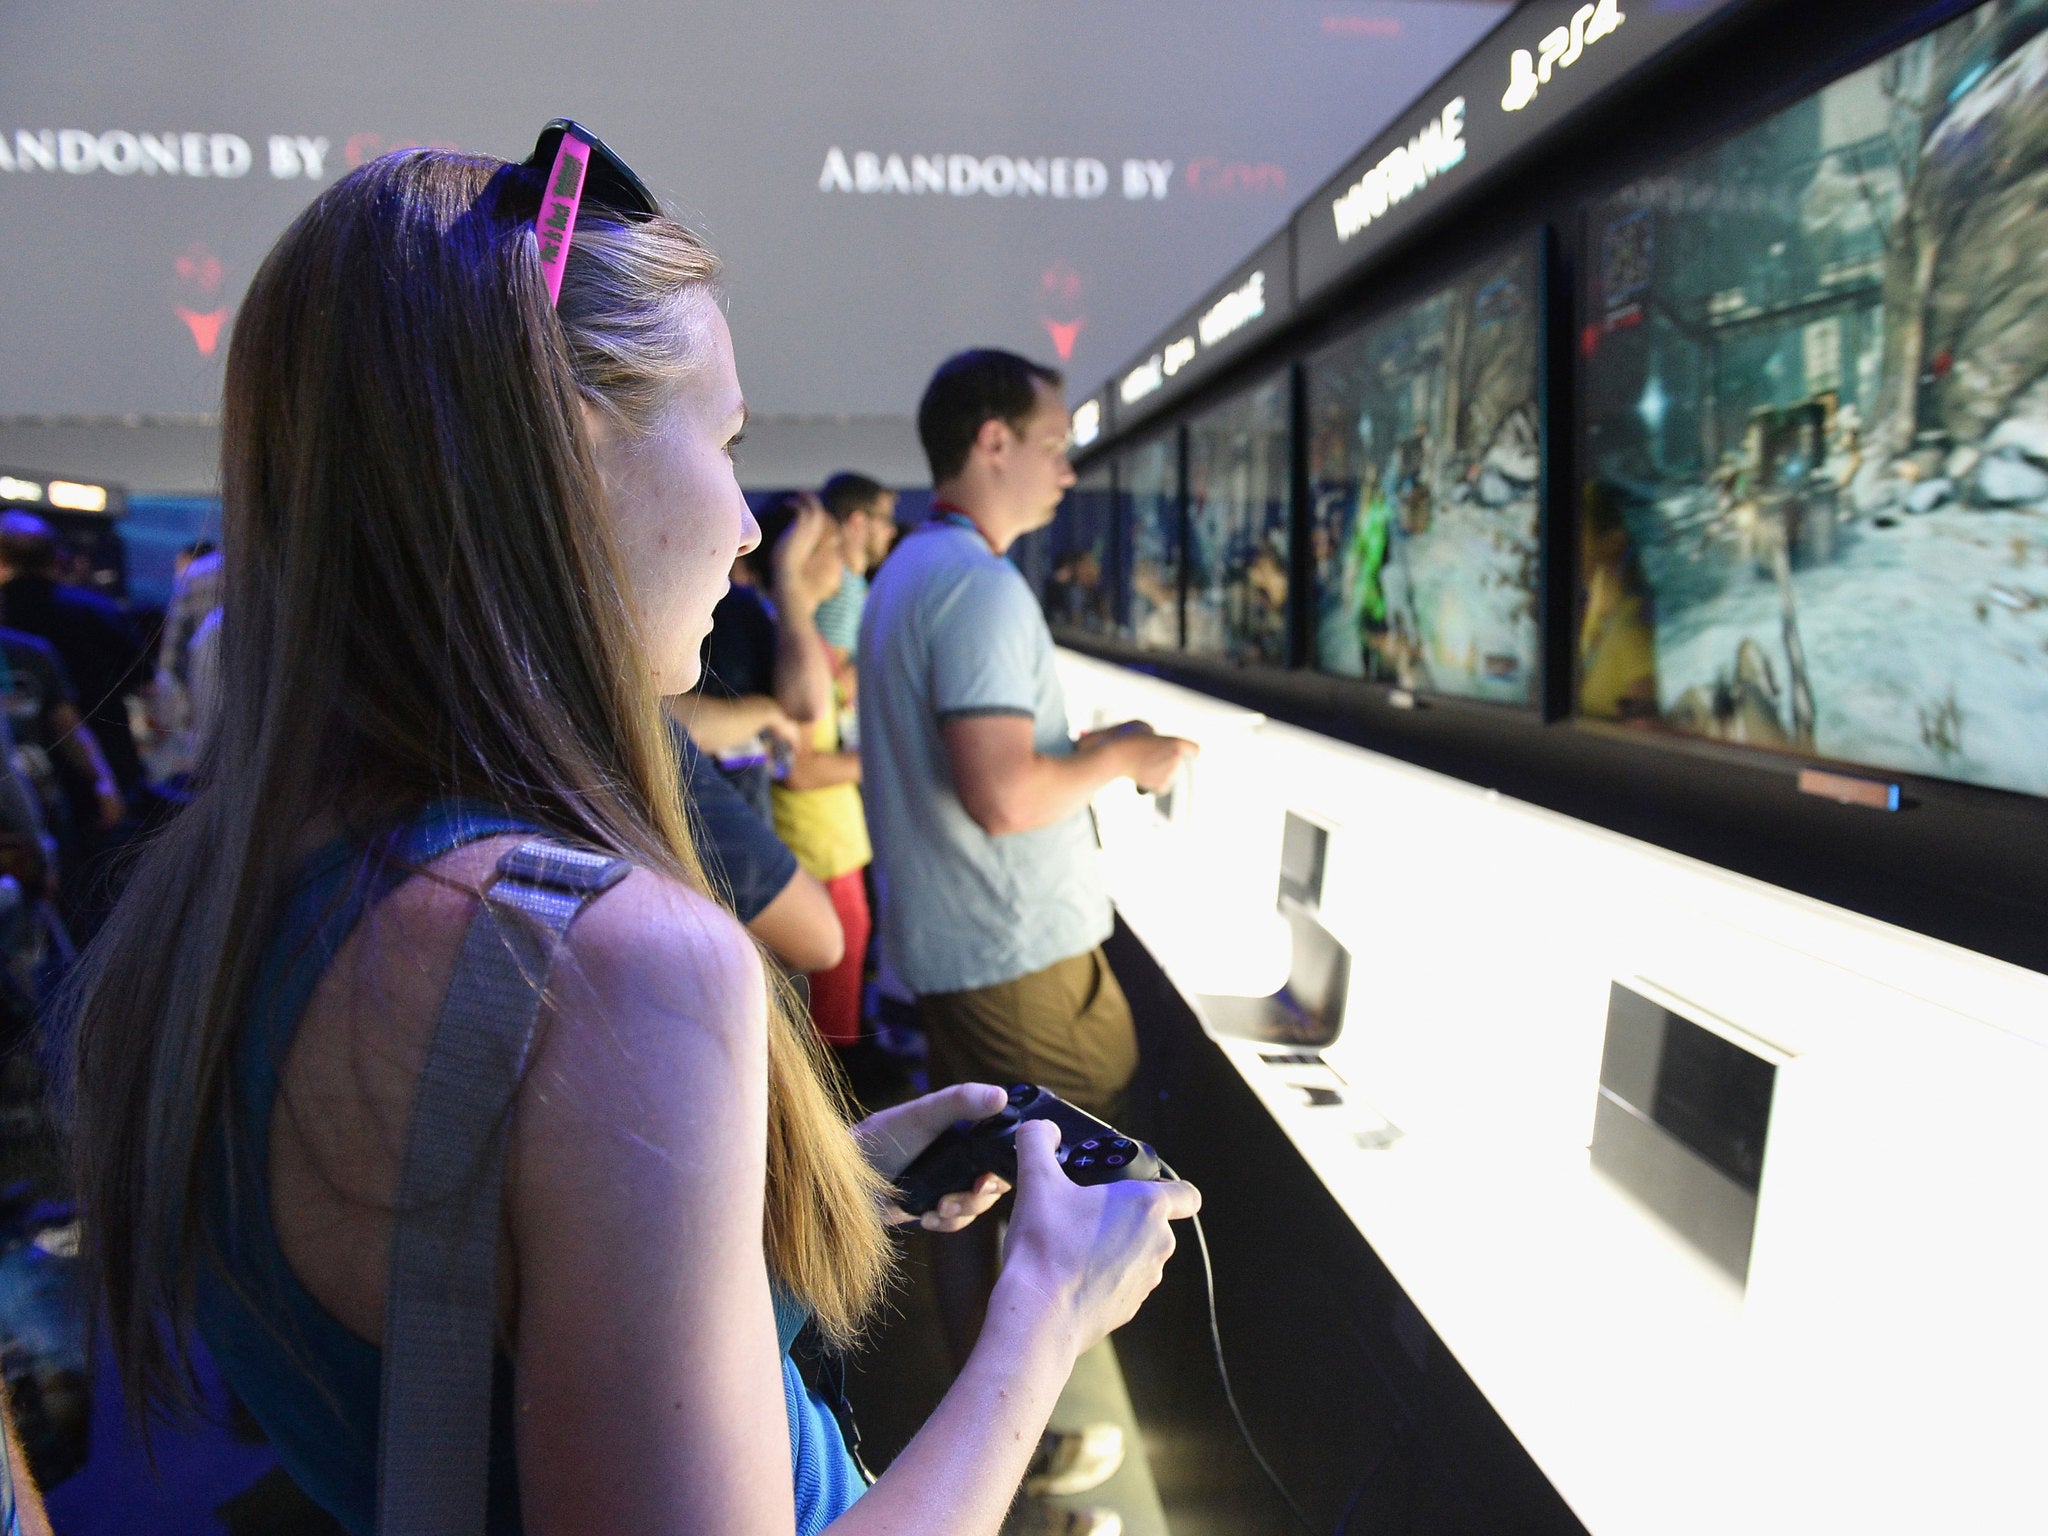 A group of male gamers have described how the are privileged in a new video